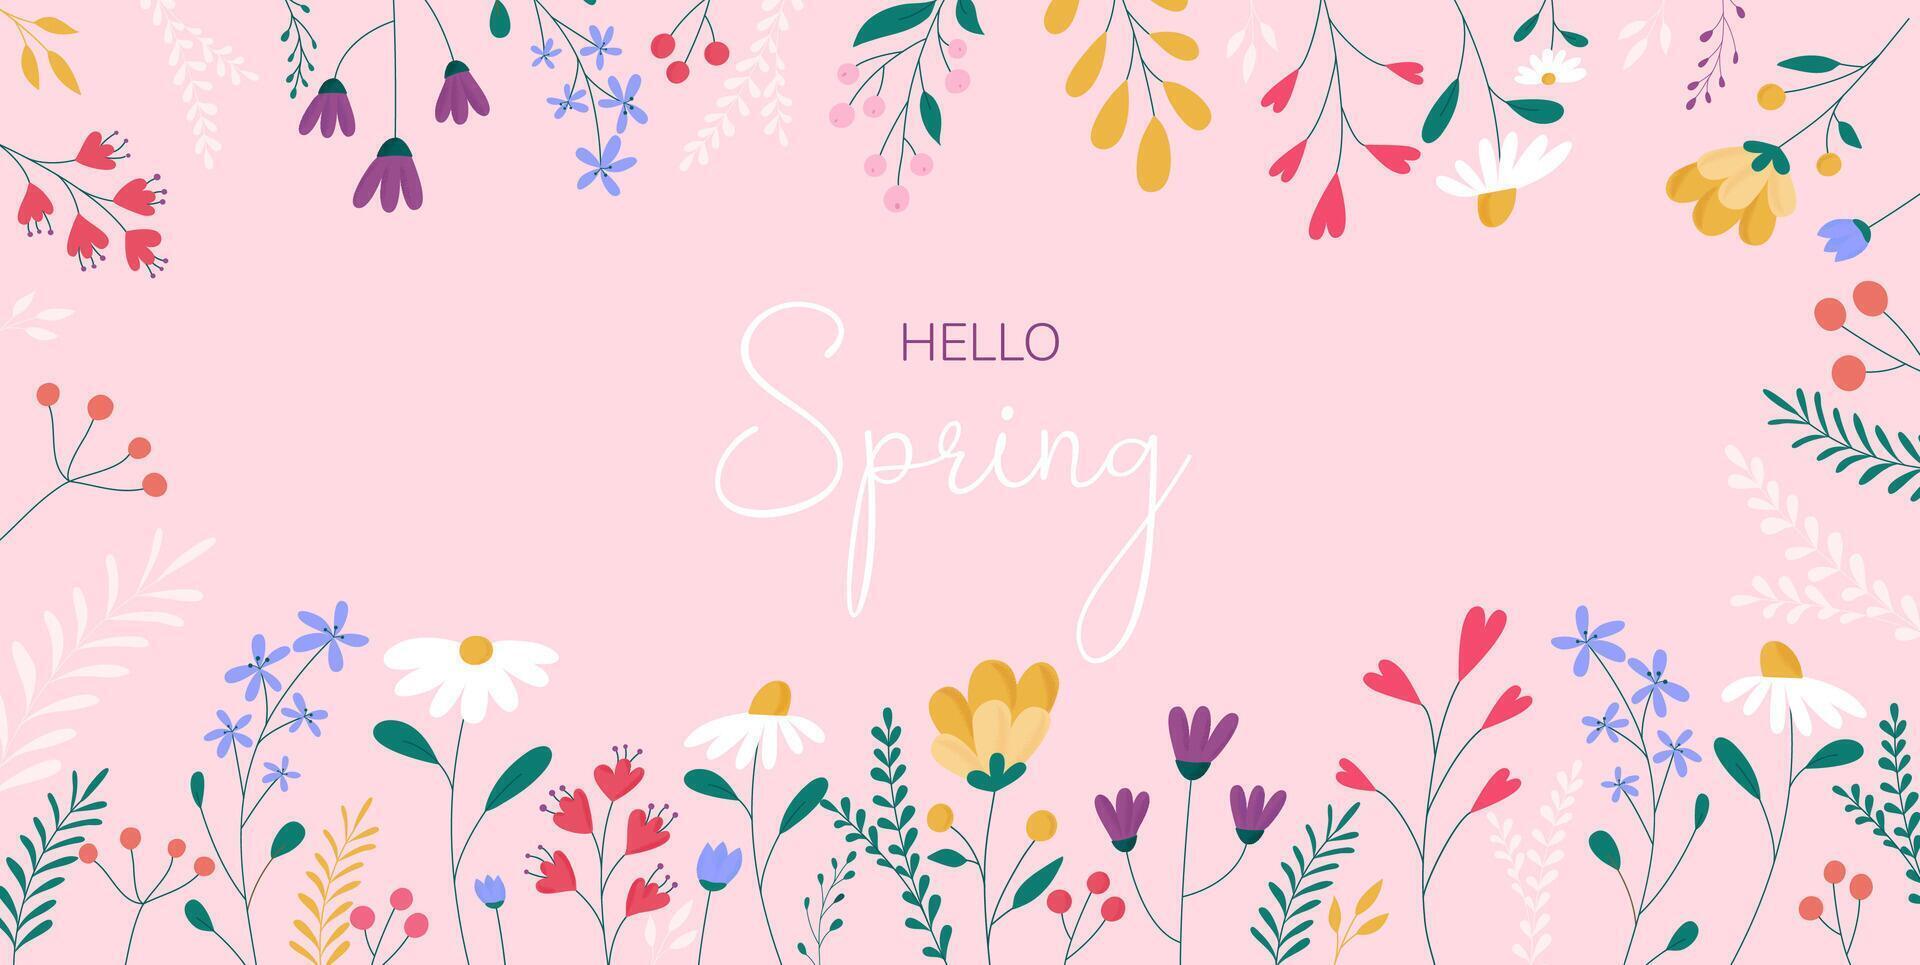 Spring background with floral elements, leaves. Editable vector template for greeting card, poster banner, invitation, social media post, mobile apps. Hello spring.